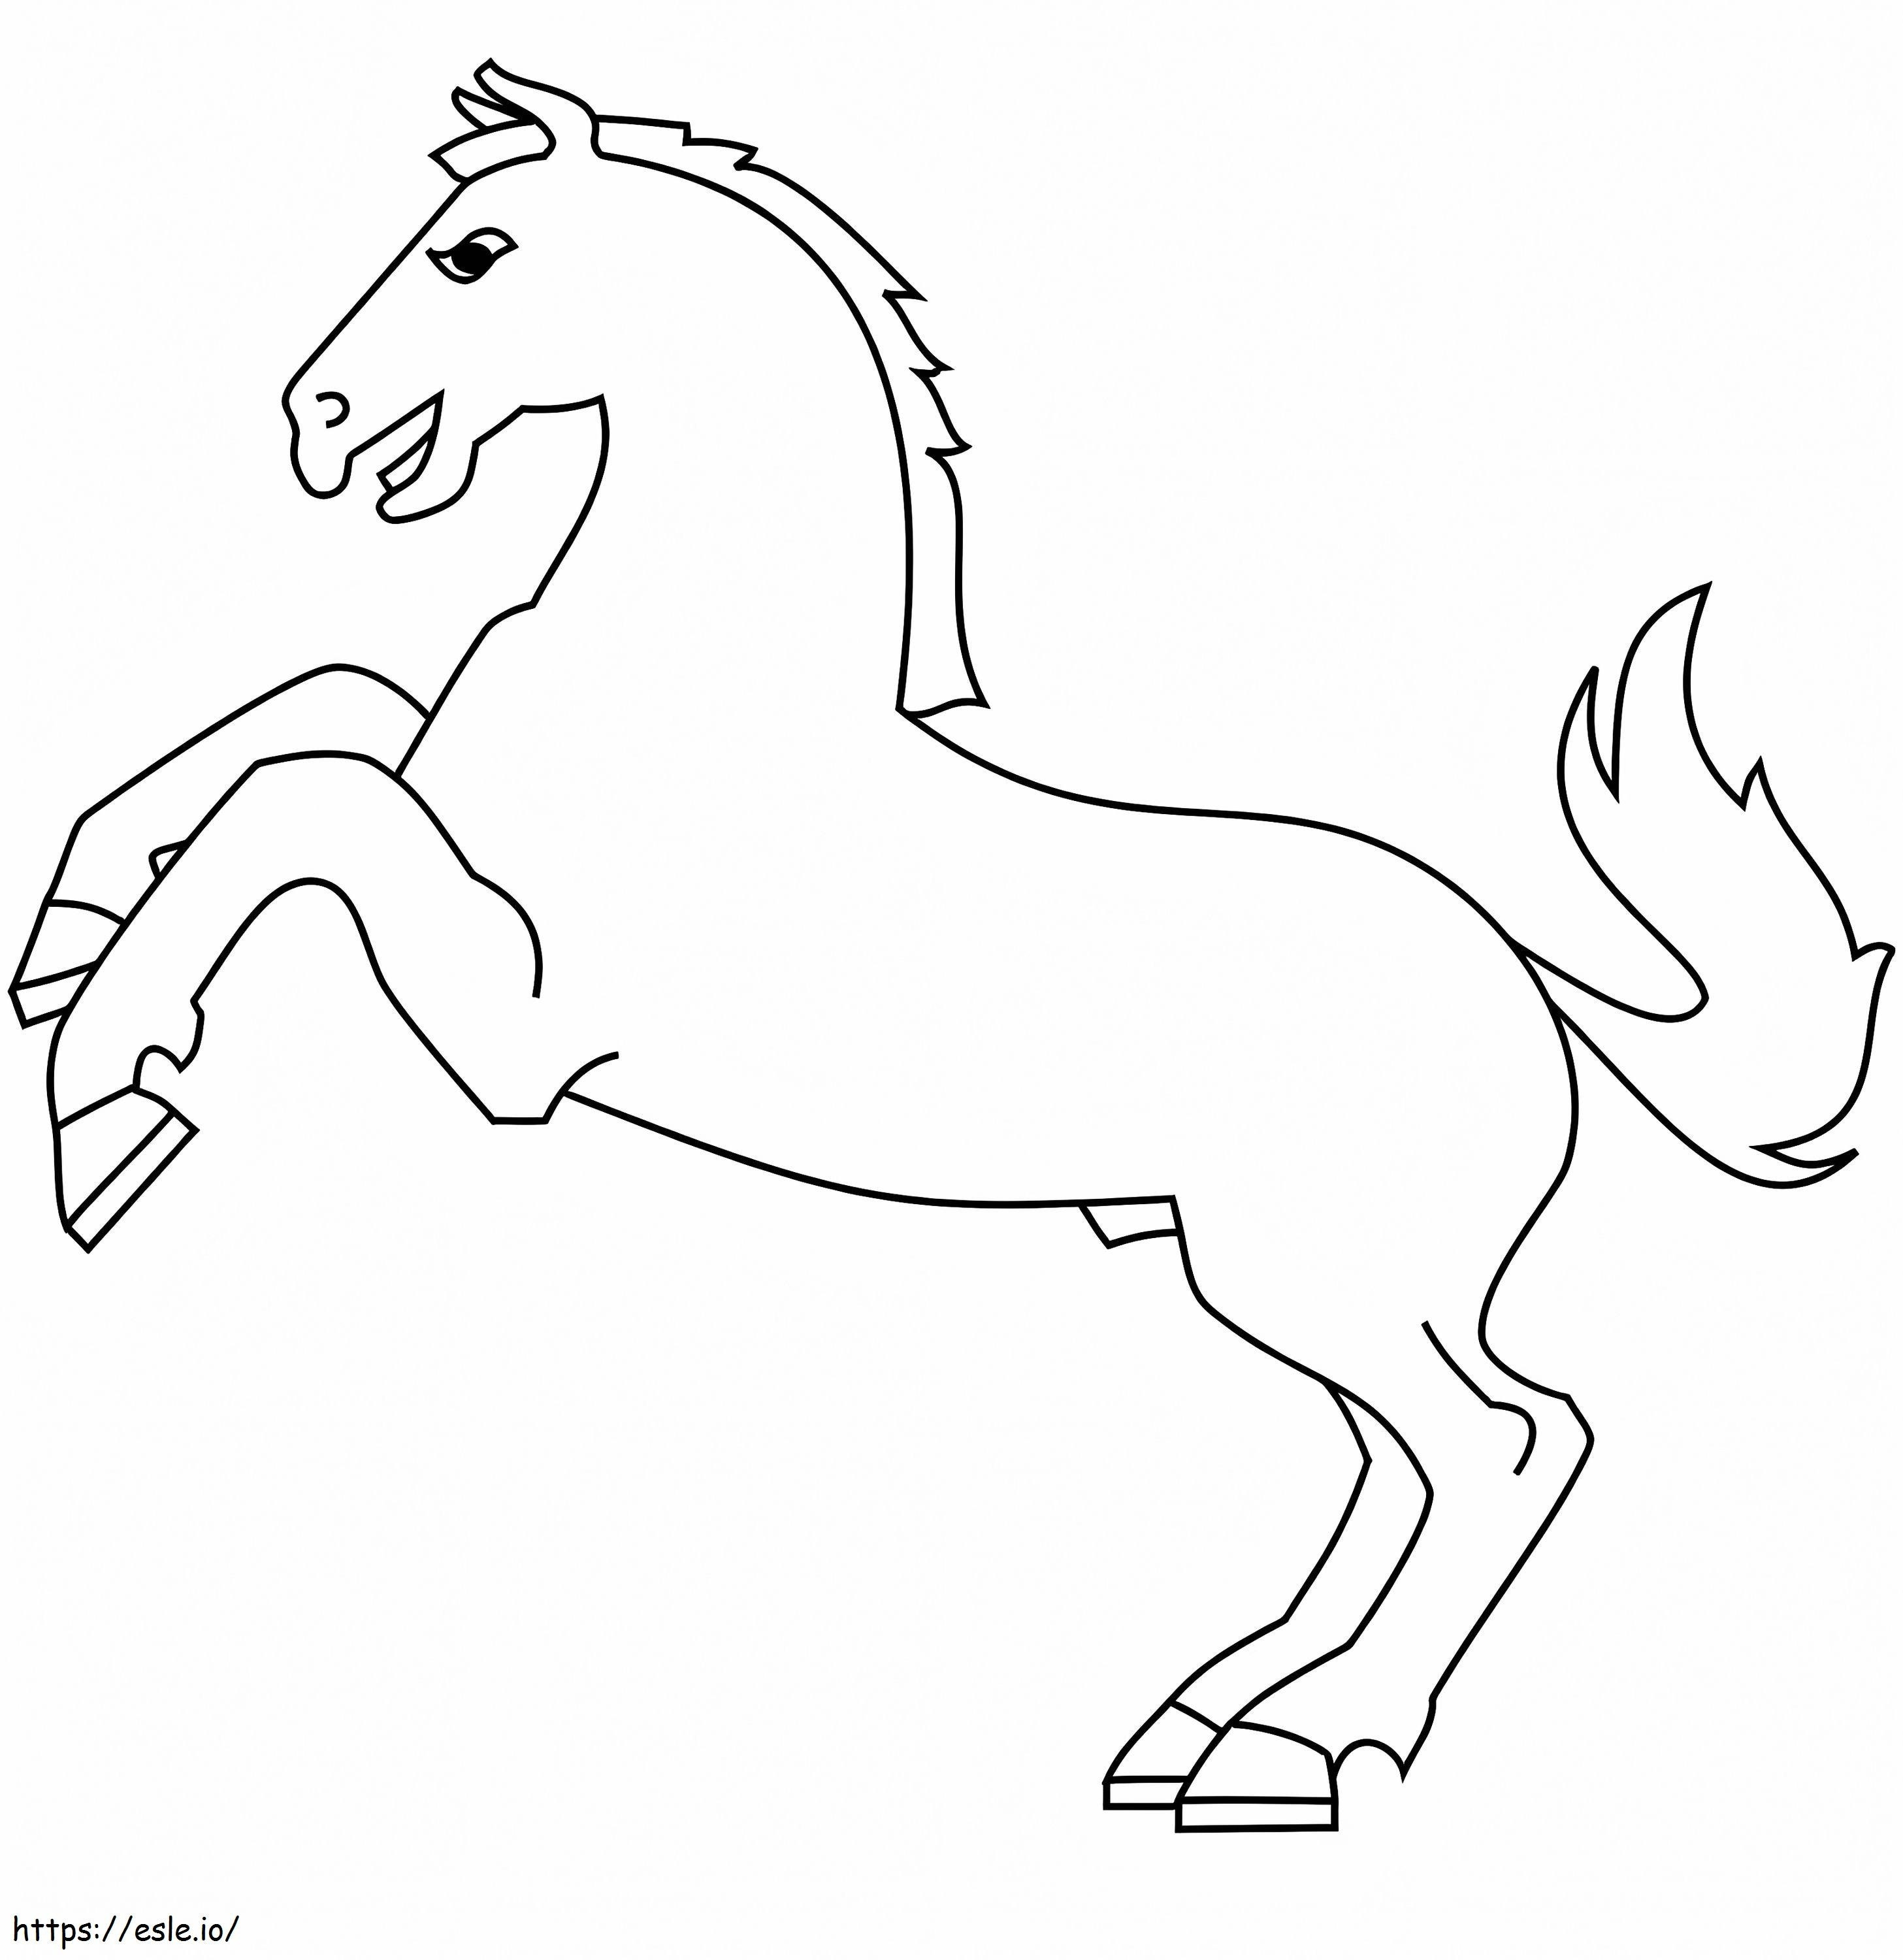 Rearing Horse coloring page